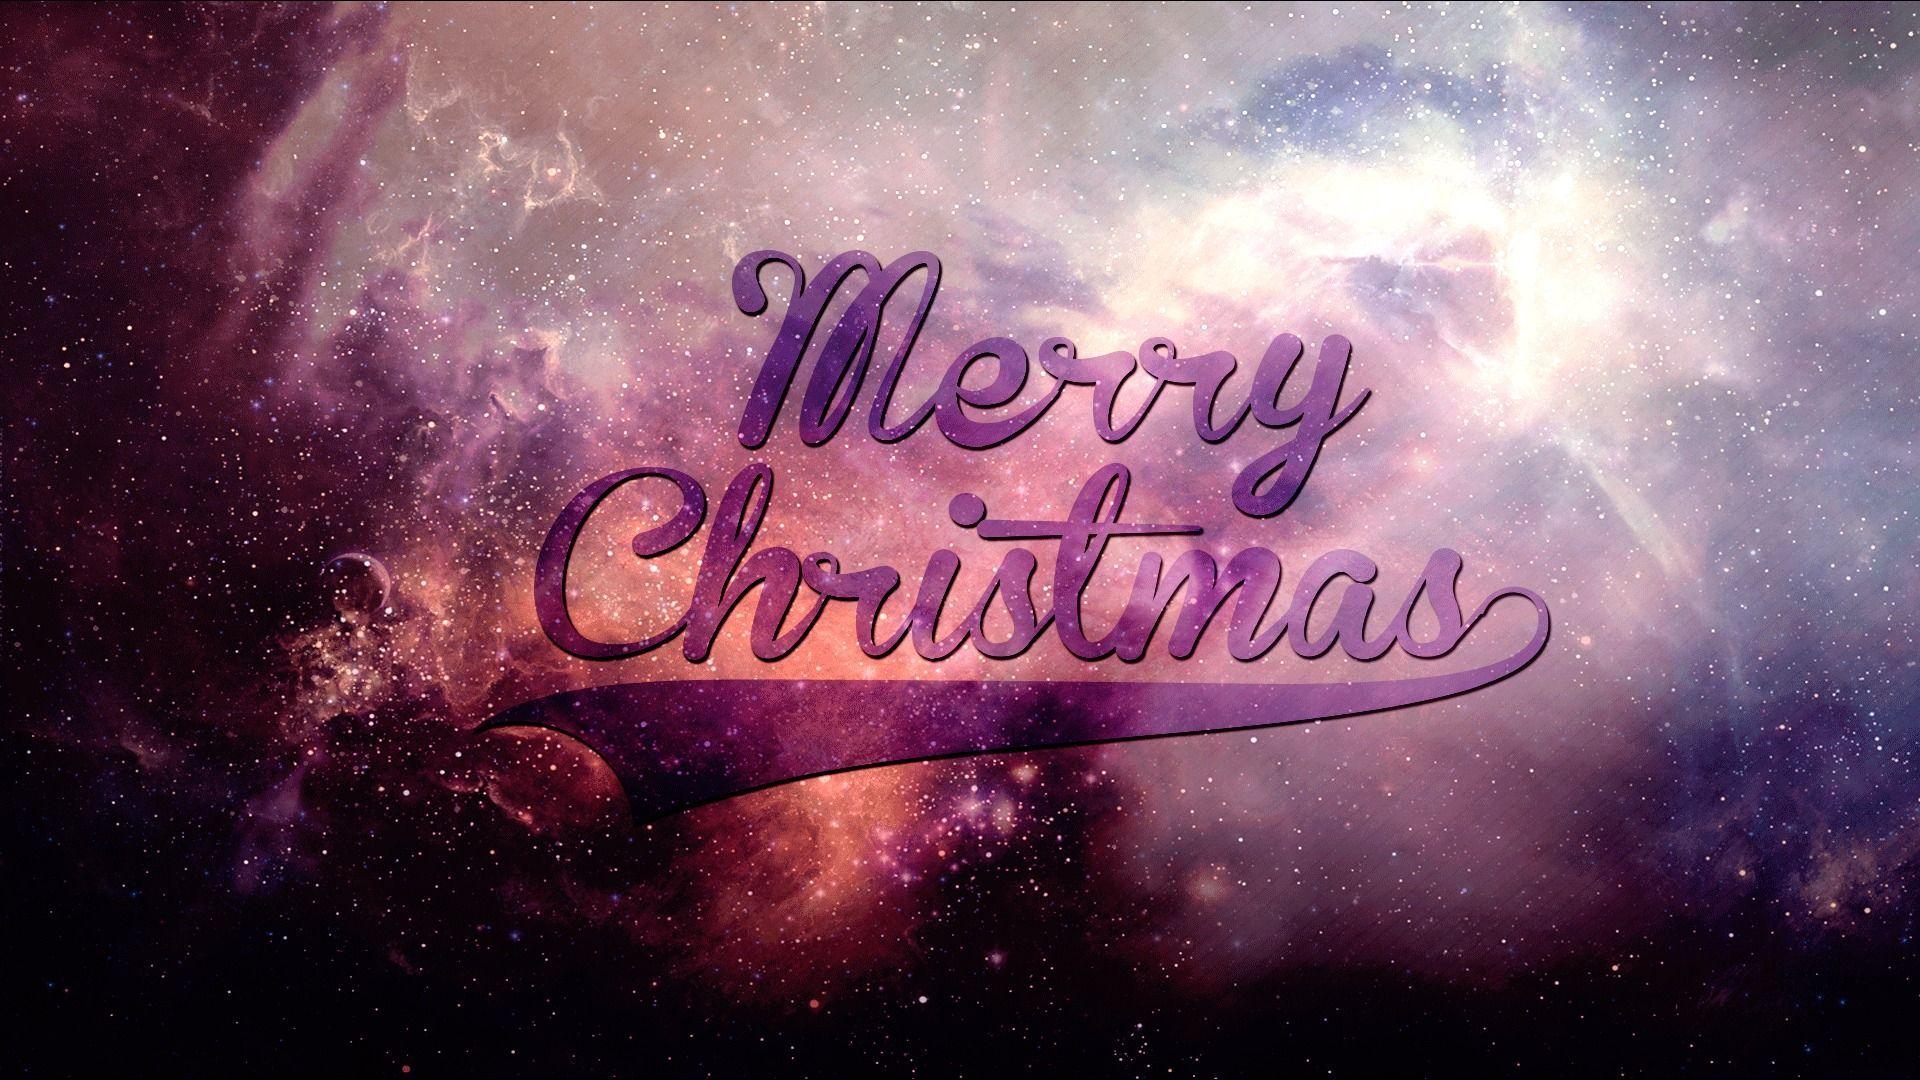 hd wallpaper picture merry christmas. Christmas. Merry